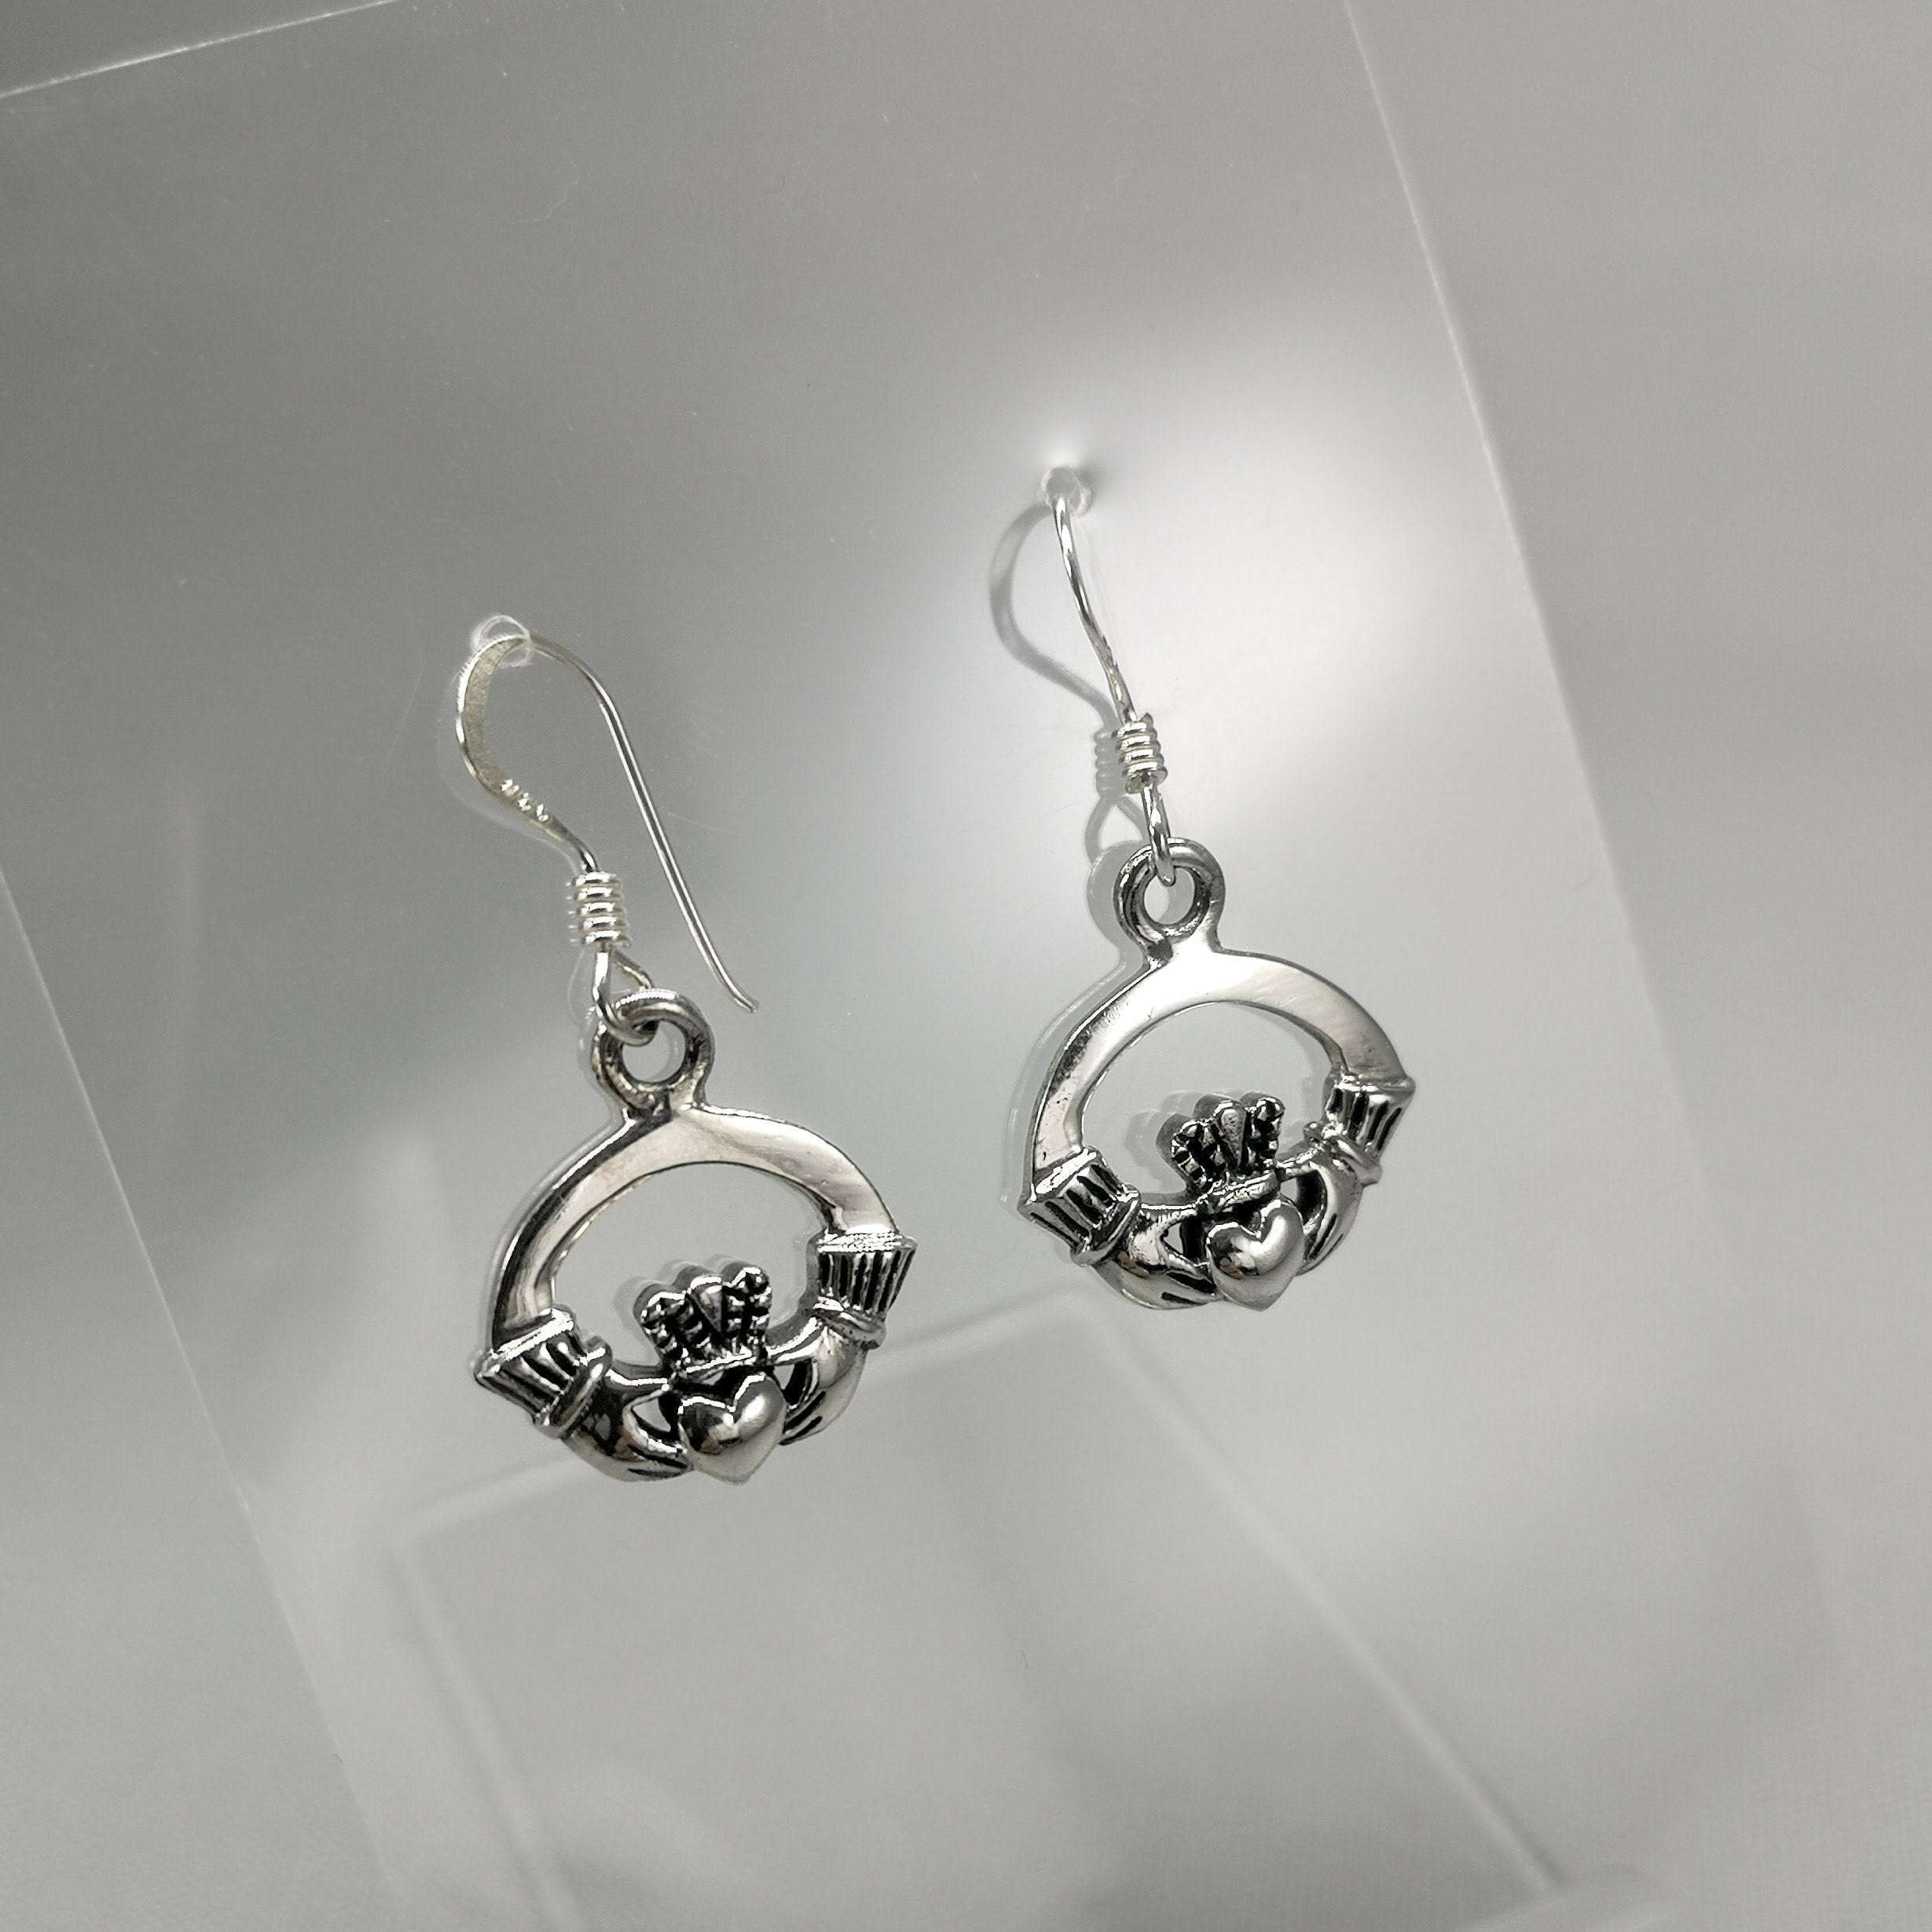 Traditional Collection Sterling Silver Claddagh Drop Earrings.